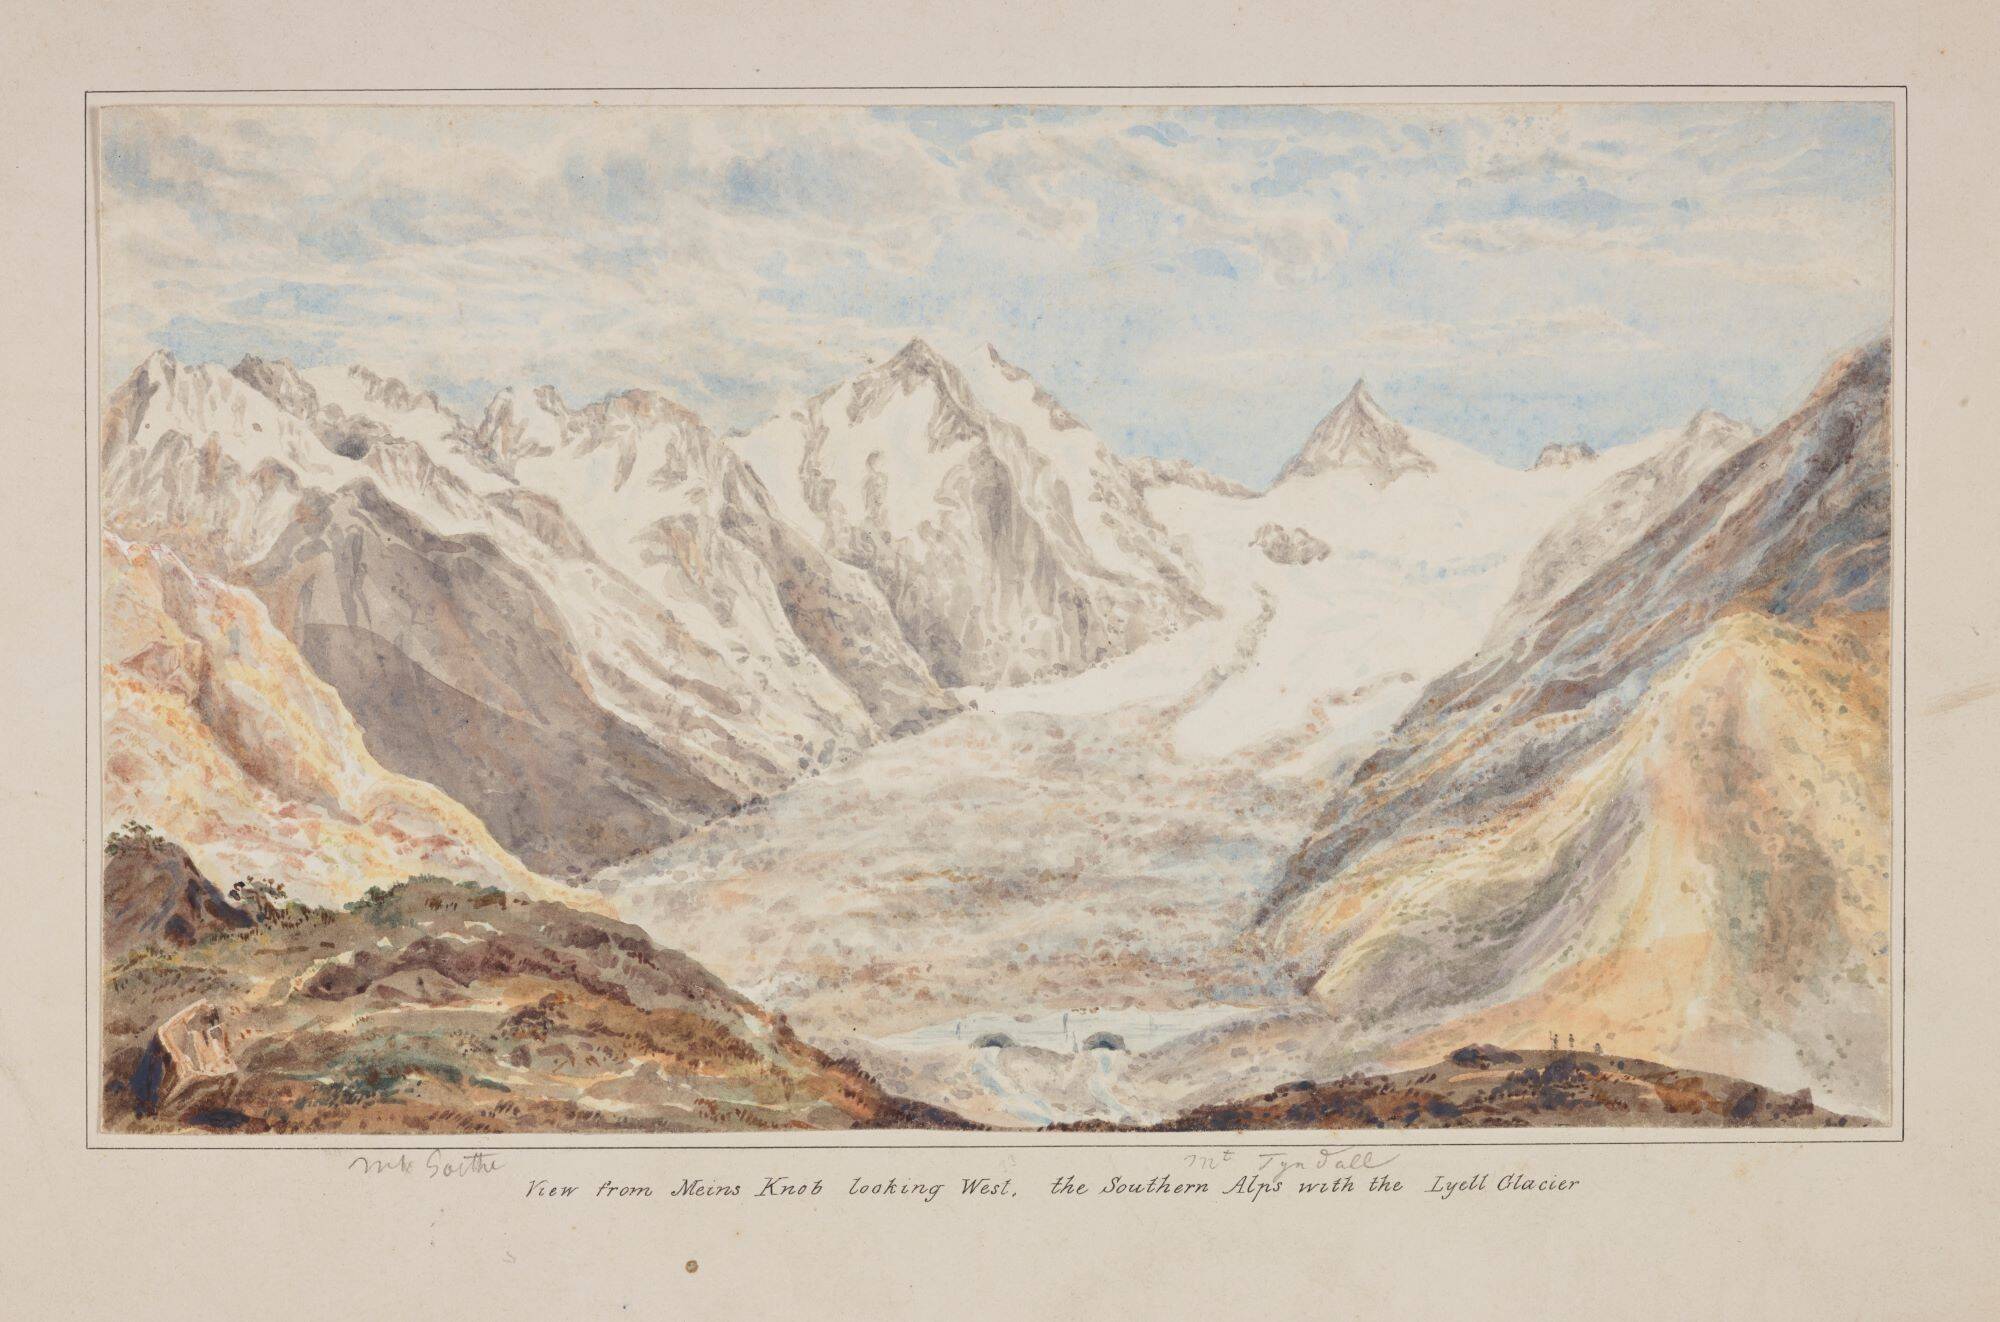 <p>Johann Franz Julius von Haast, <em>View from Meins Knob looking West, the Southern Alps with the Lyell Glacier</em>, 1867, Alexander Turnbull Library, National Library of New Zealand Te Puna Mātauranga o Aotearoa, A-149-003.</p>
